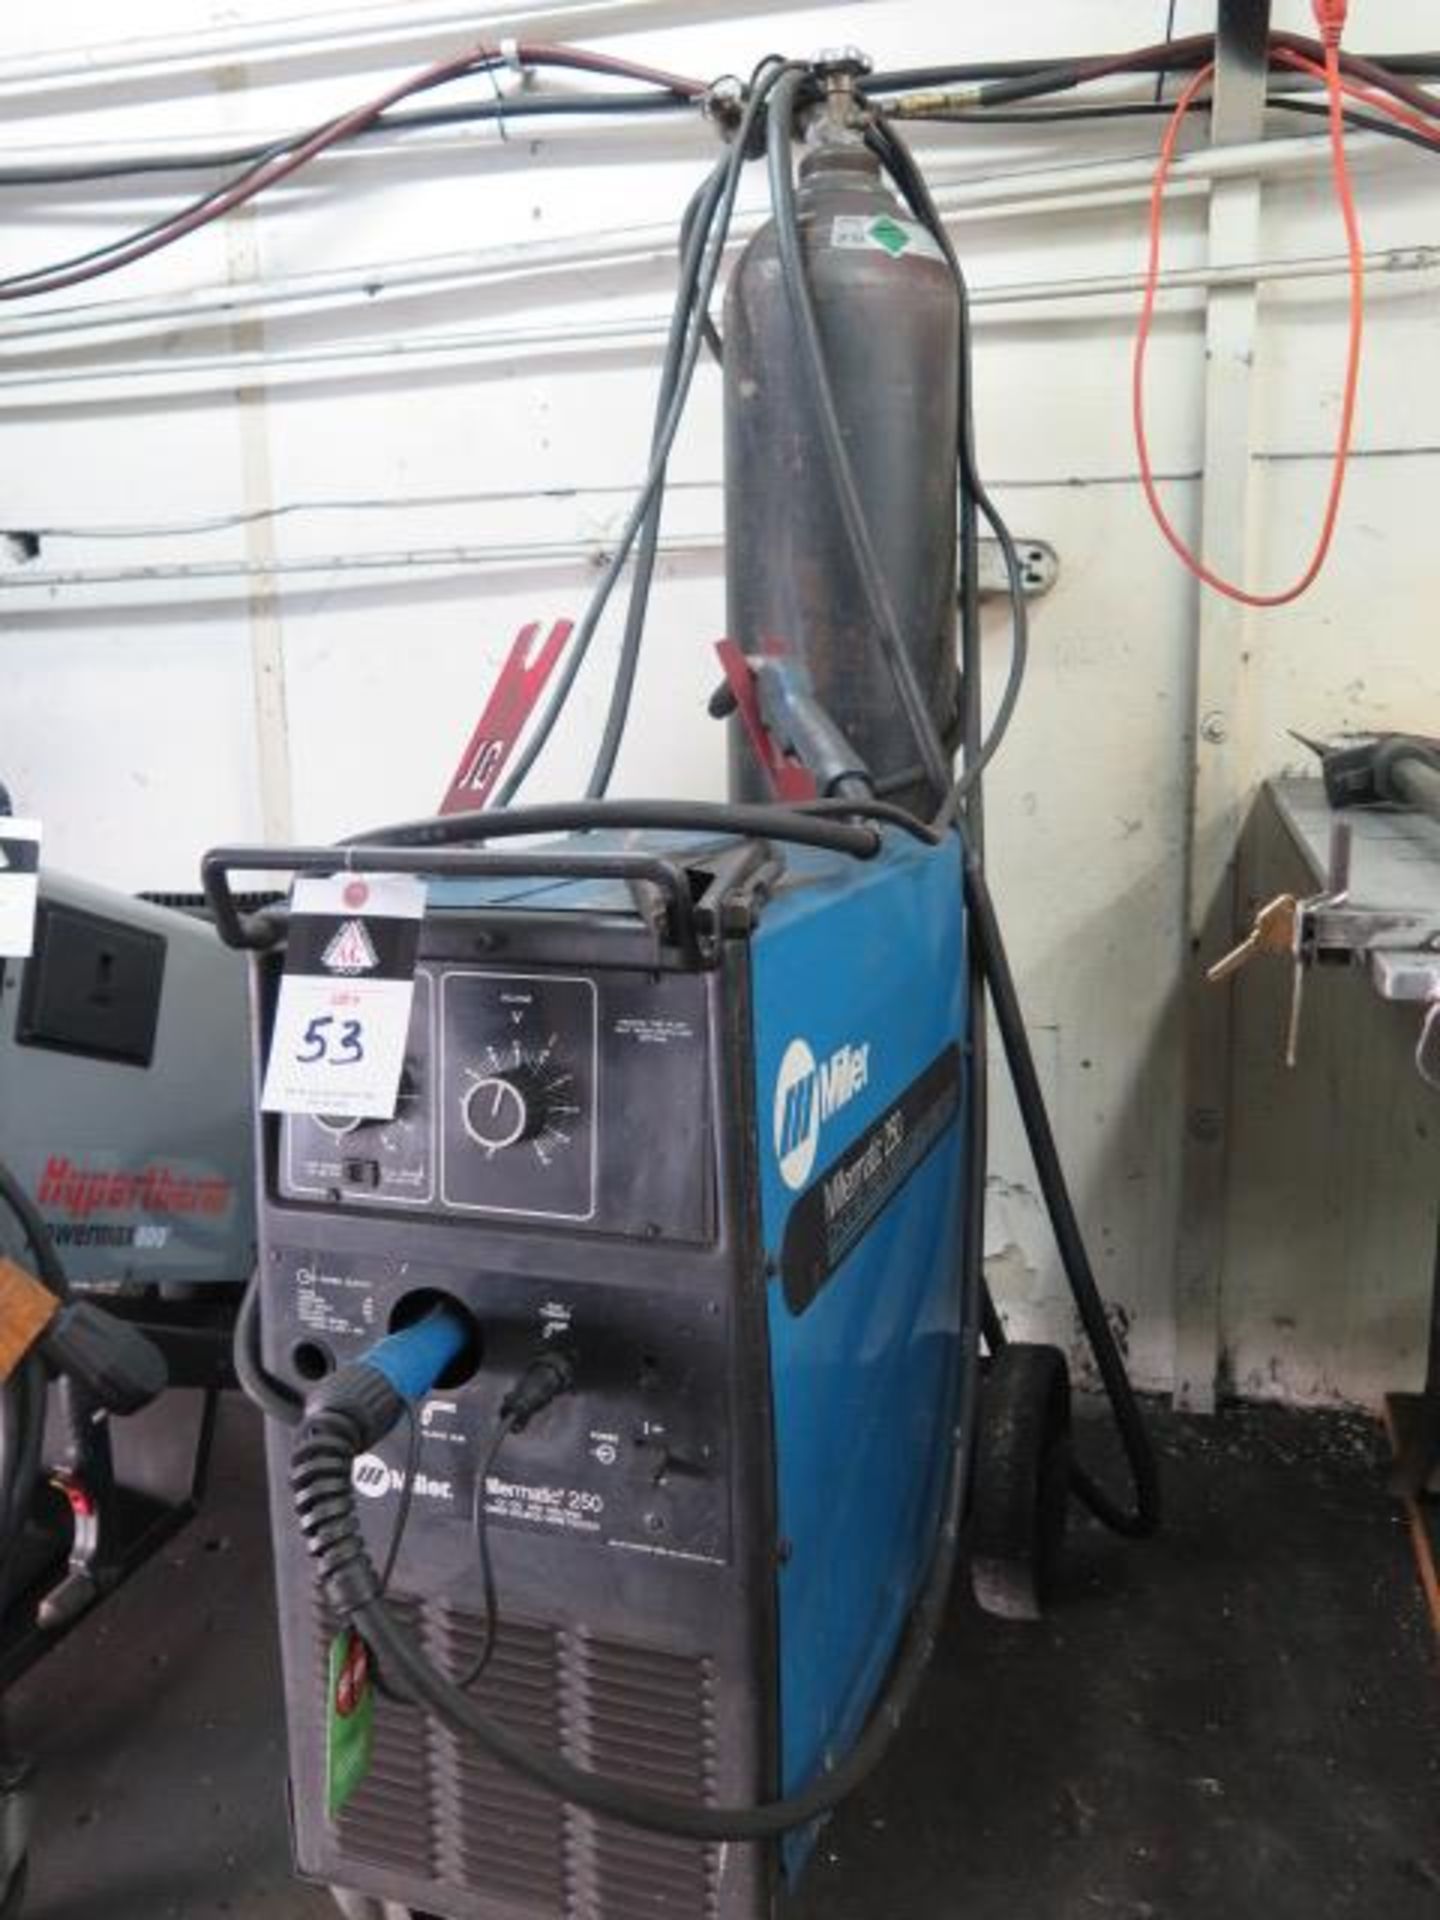 Miler Millermatic 250 CV-DC Arc Welding Power Source and Wire Feeder (SOLD AS-IS - NO WARRANTY) - Image 3 of 10